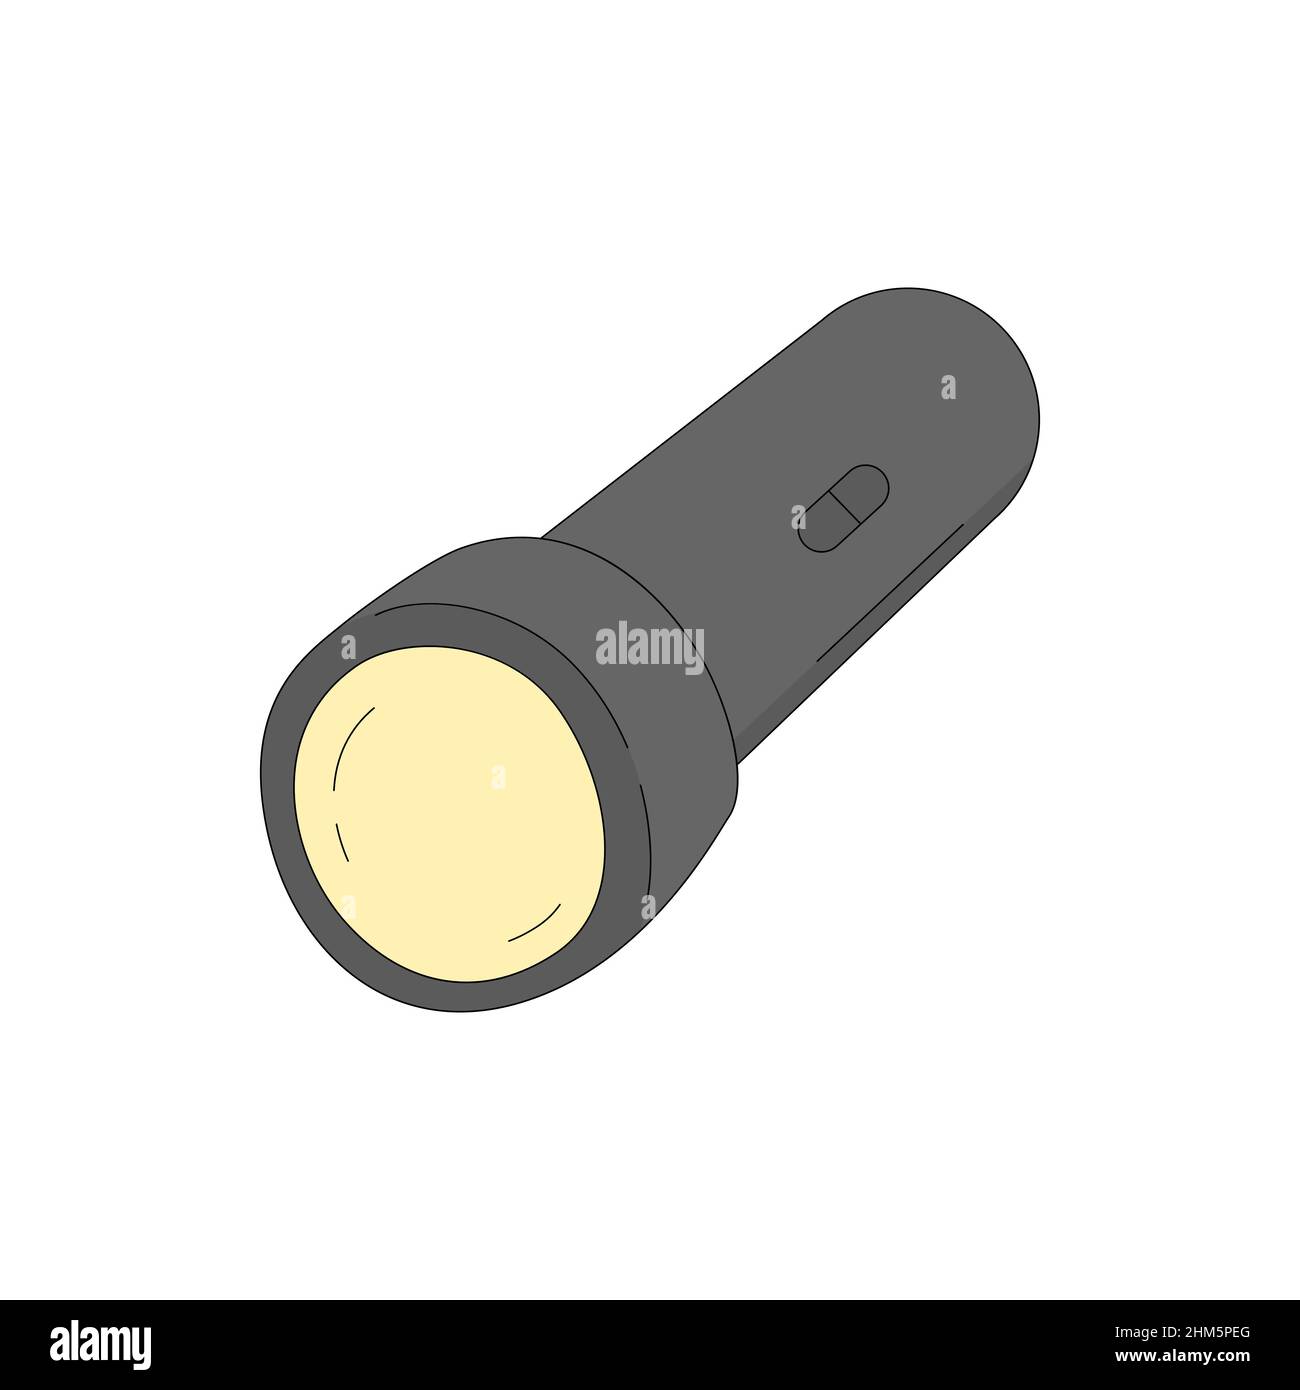 Cartoon vector illustration of flashlight isolated on a white background. Pocket torch - emergency service equipment and camping trip item Stock Vector